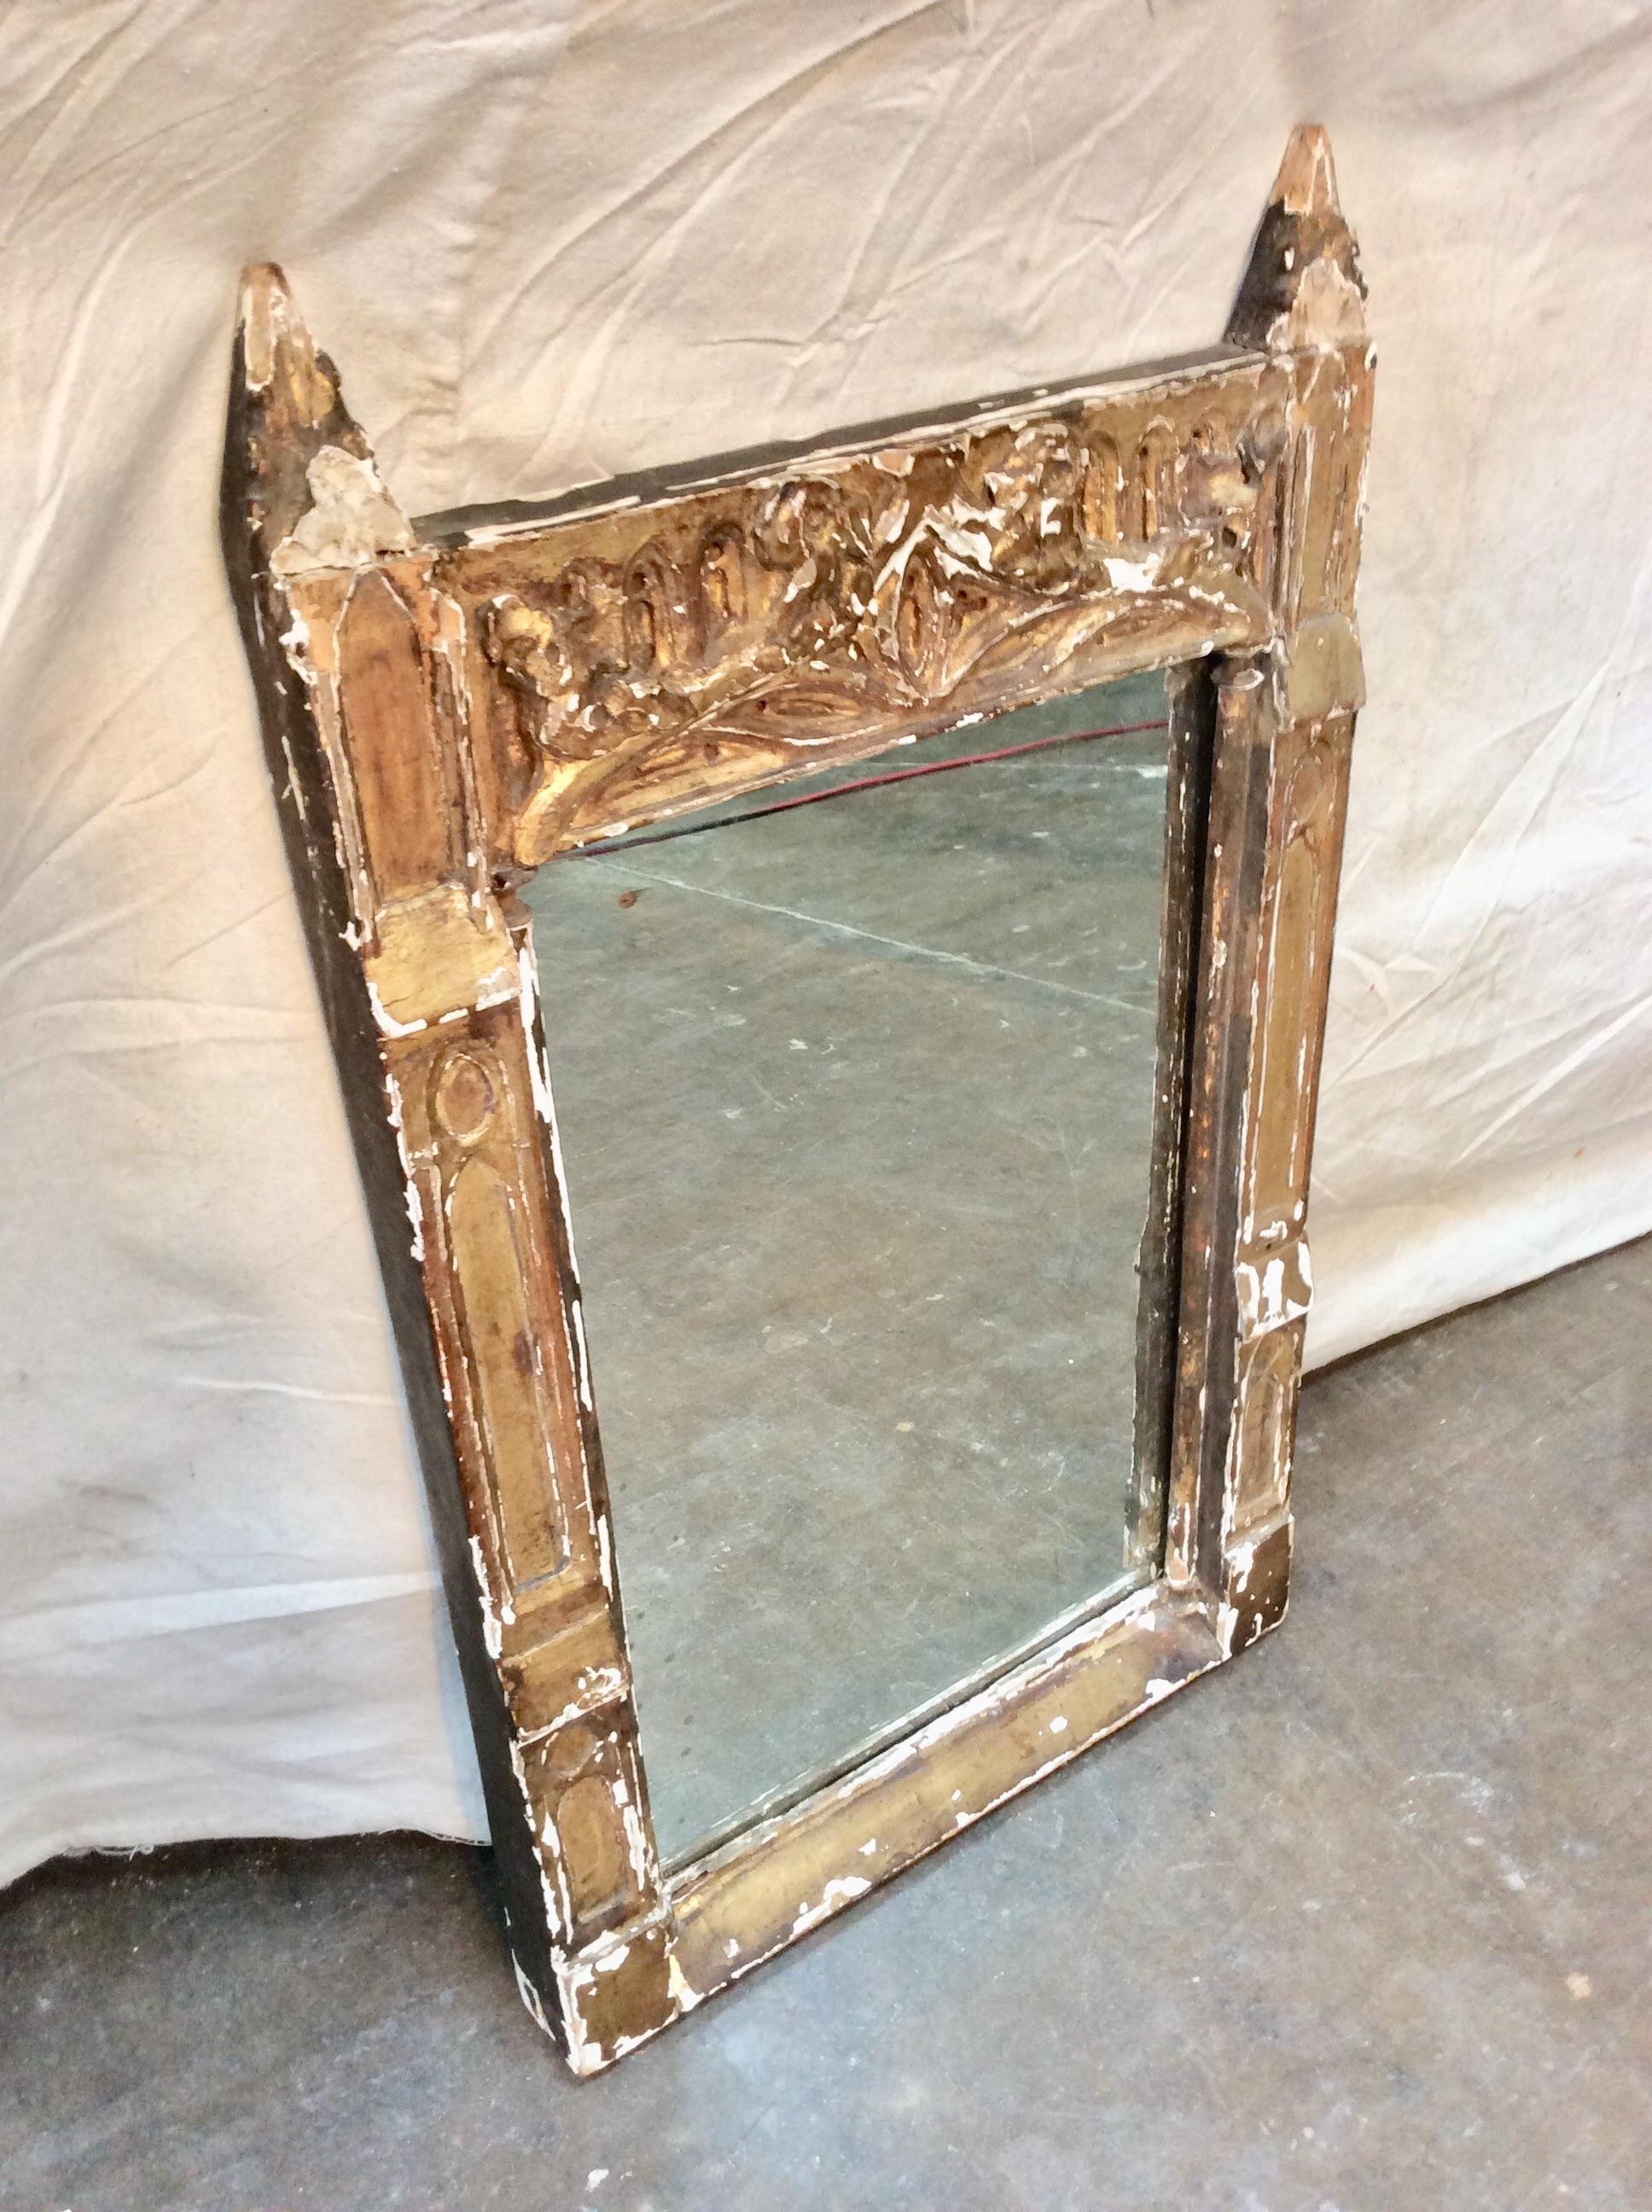 Found in the South of France, this beautiful carved and gilded French wall mirror features a decorative and ornate frame. The mirrored glass has some spotting and crazing which adds to the patina of the piece.

17.5